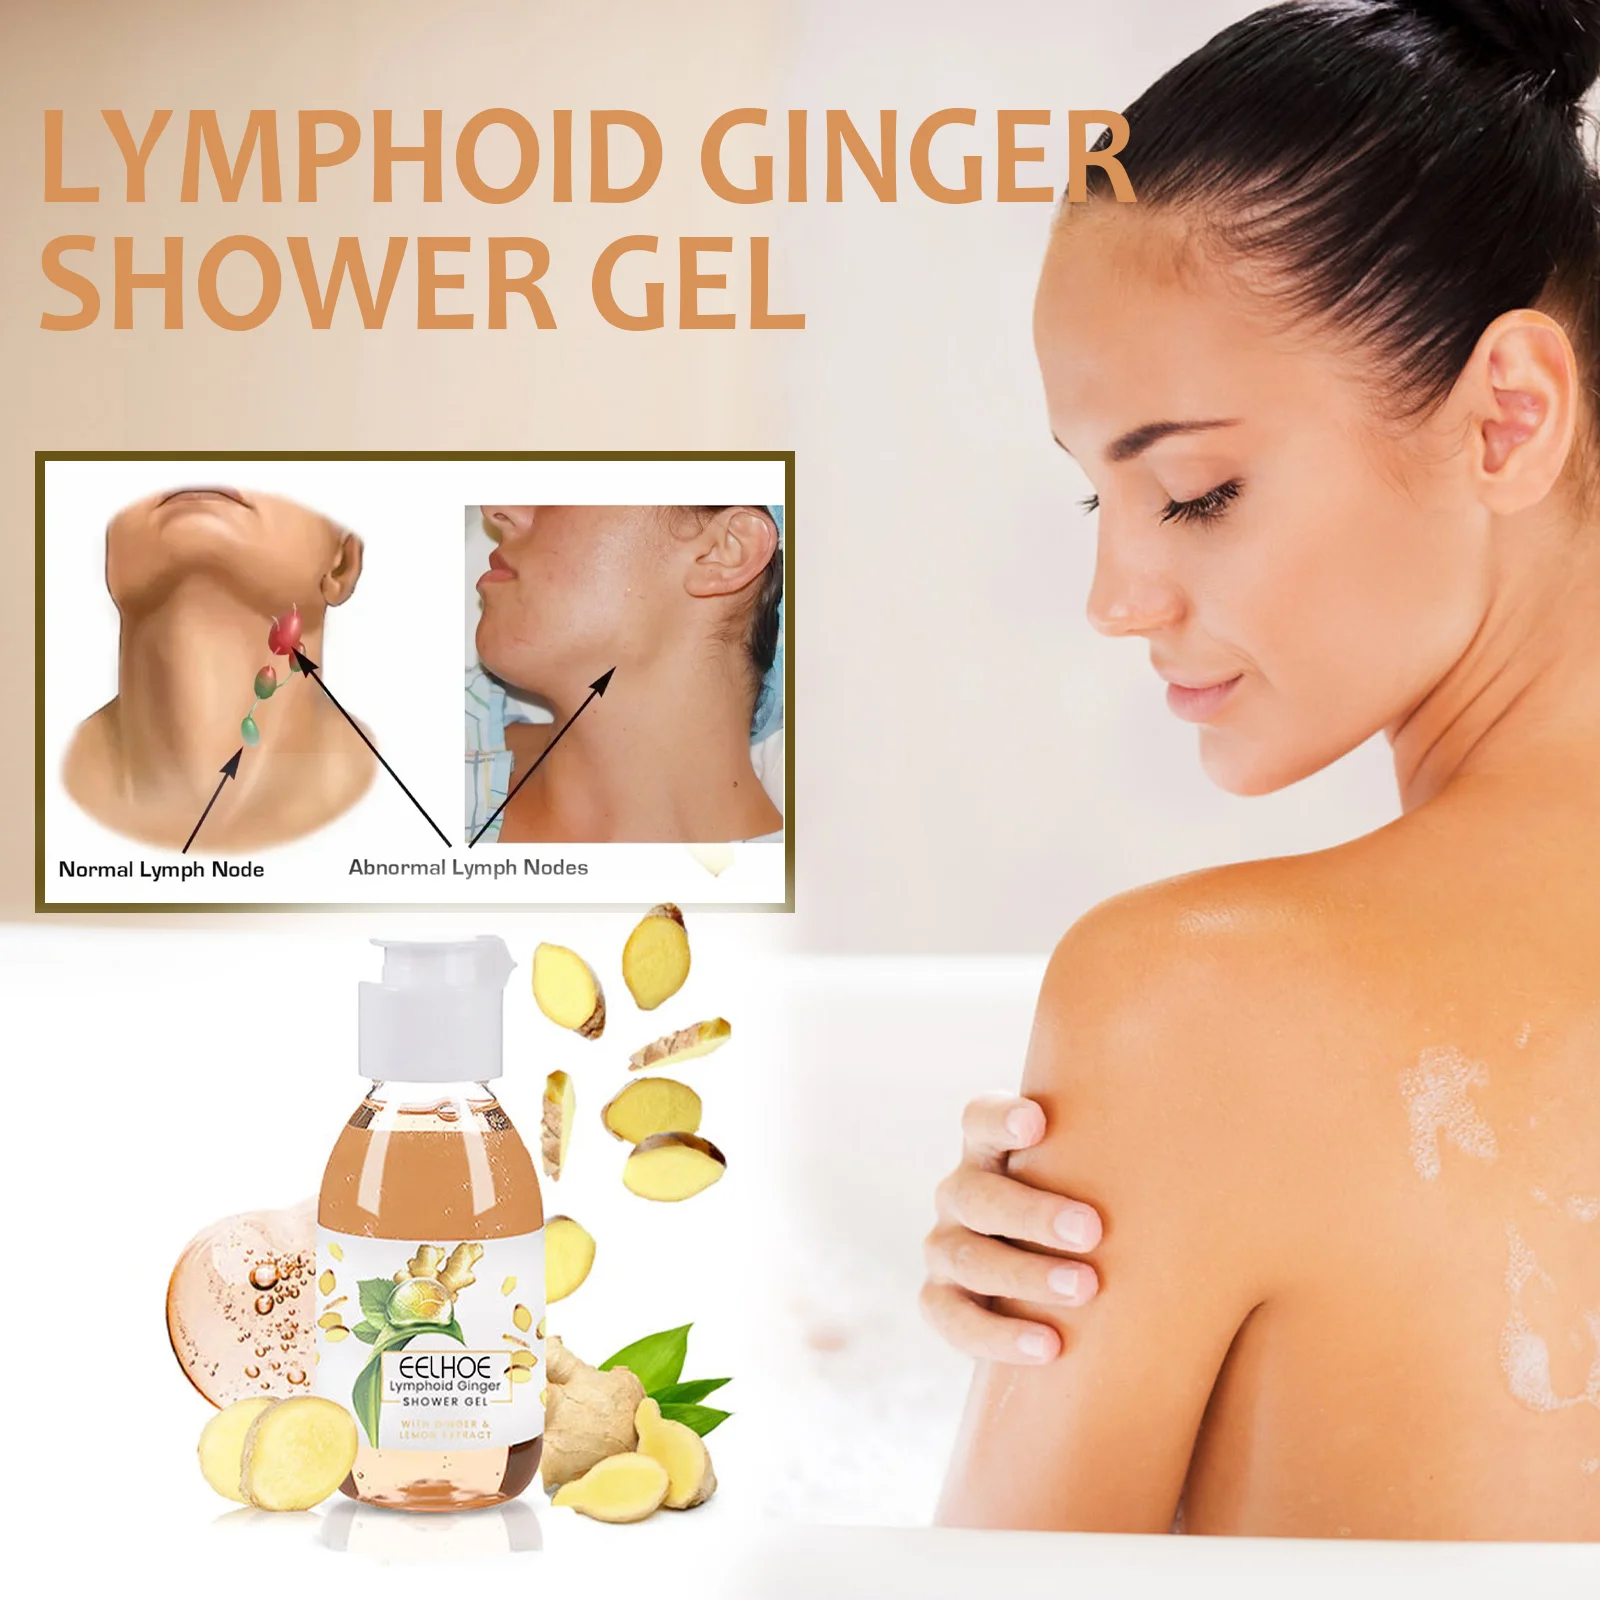 

Ginger Slimming Losing Weight Cellulite Remover Lymphatic Drainage Herbal Shower Gel Beauty Health Firm Body Care Geles De Ducha